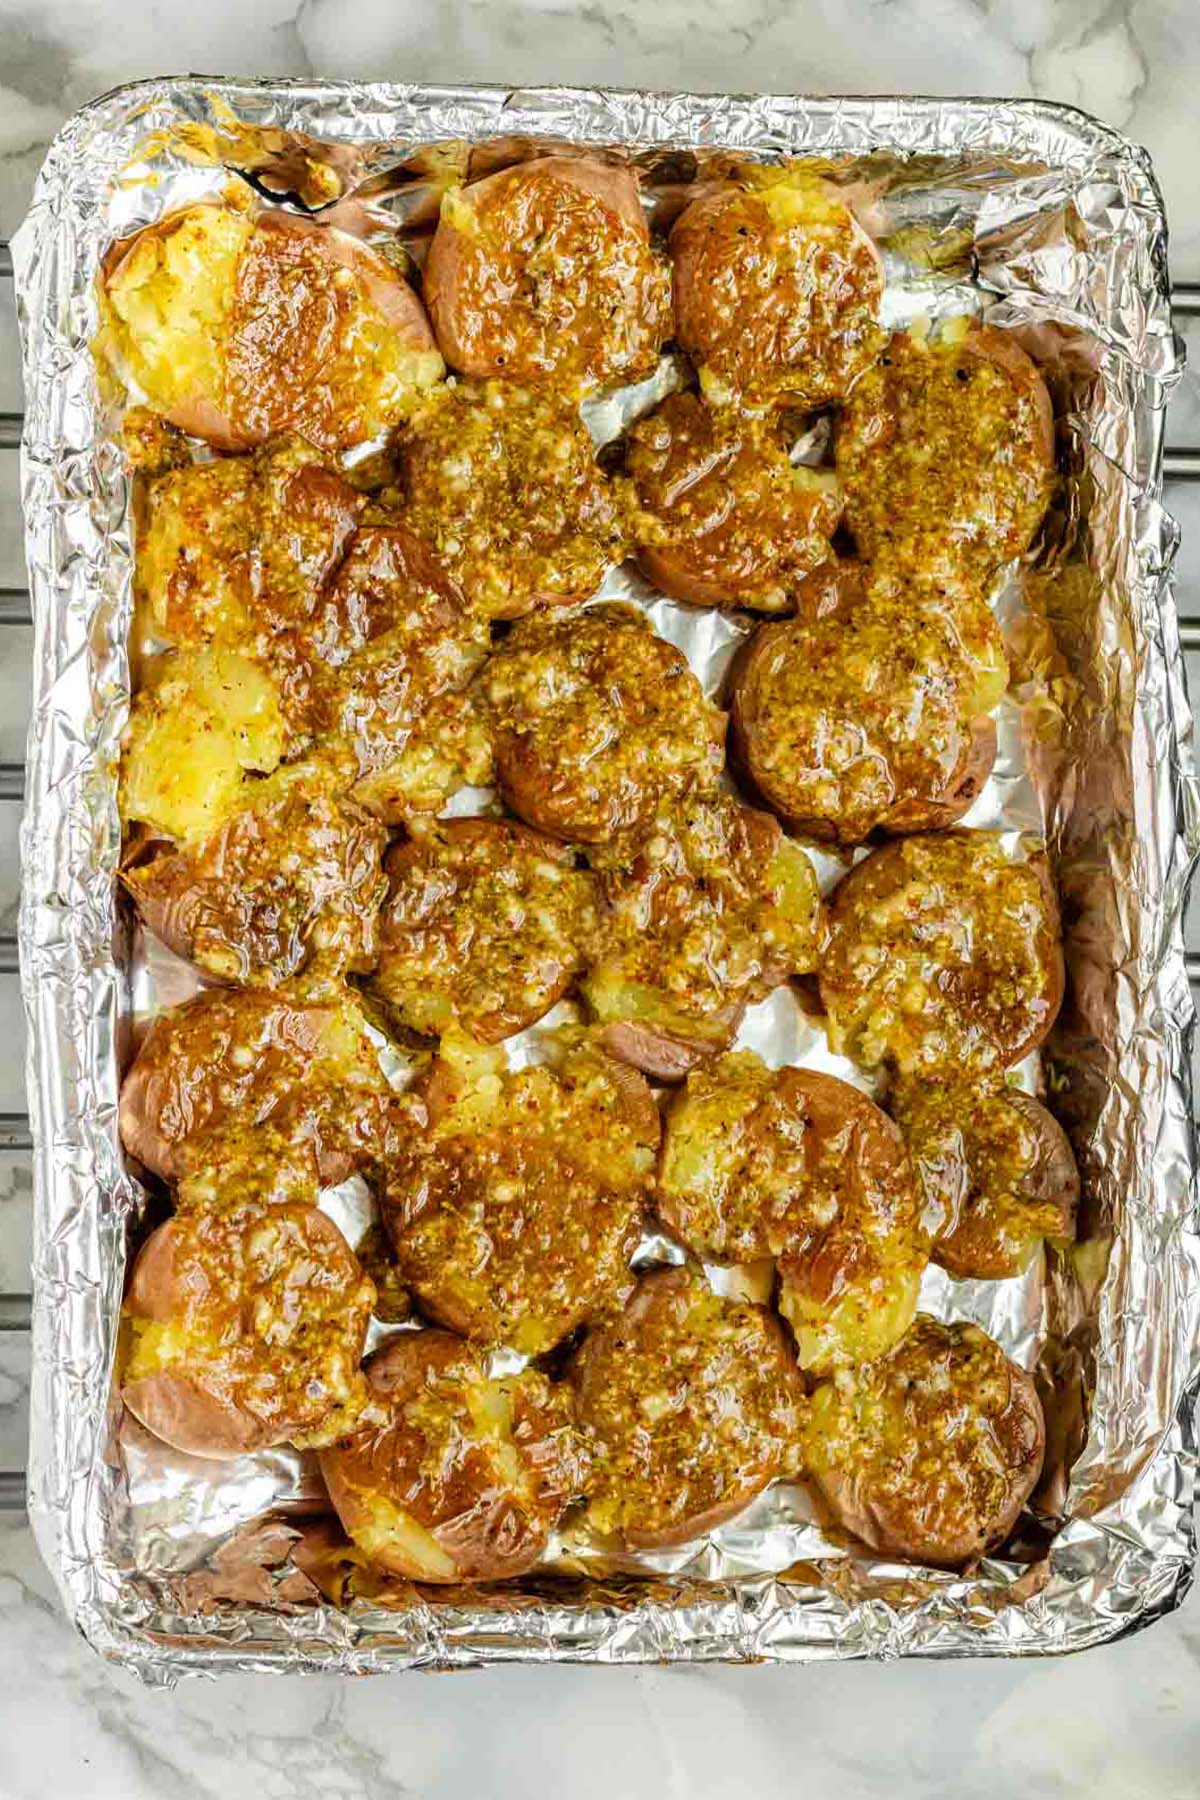 Smashed potatoes covered with mustard sauce on a foil-lined baking sheet.